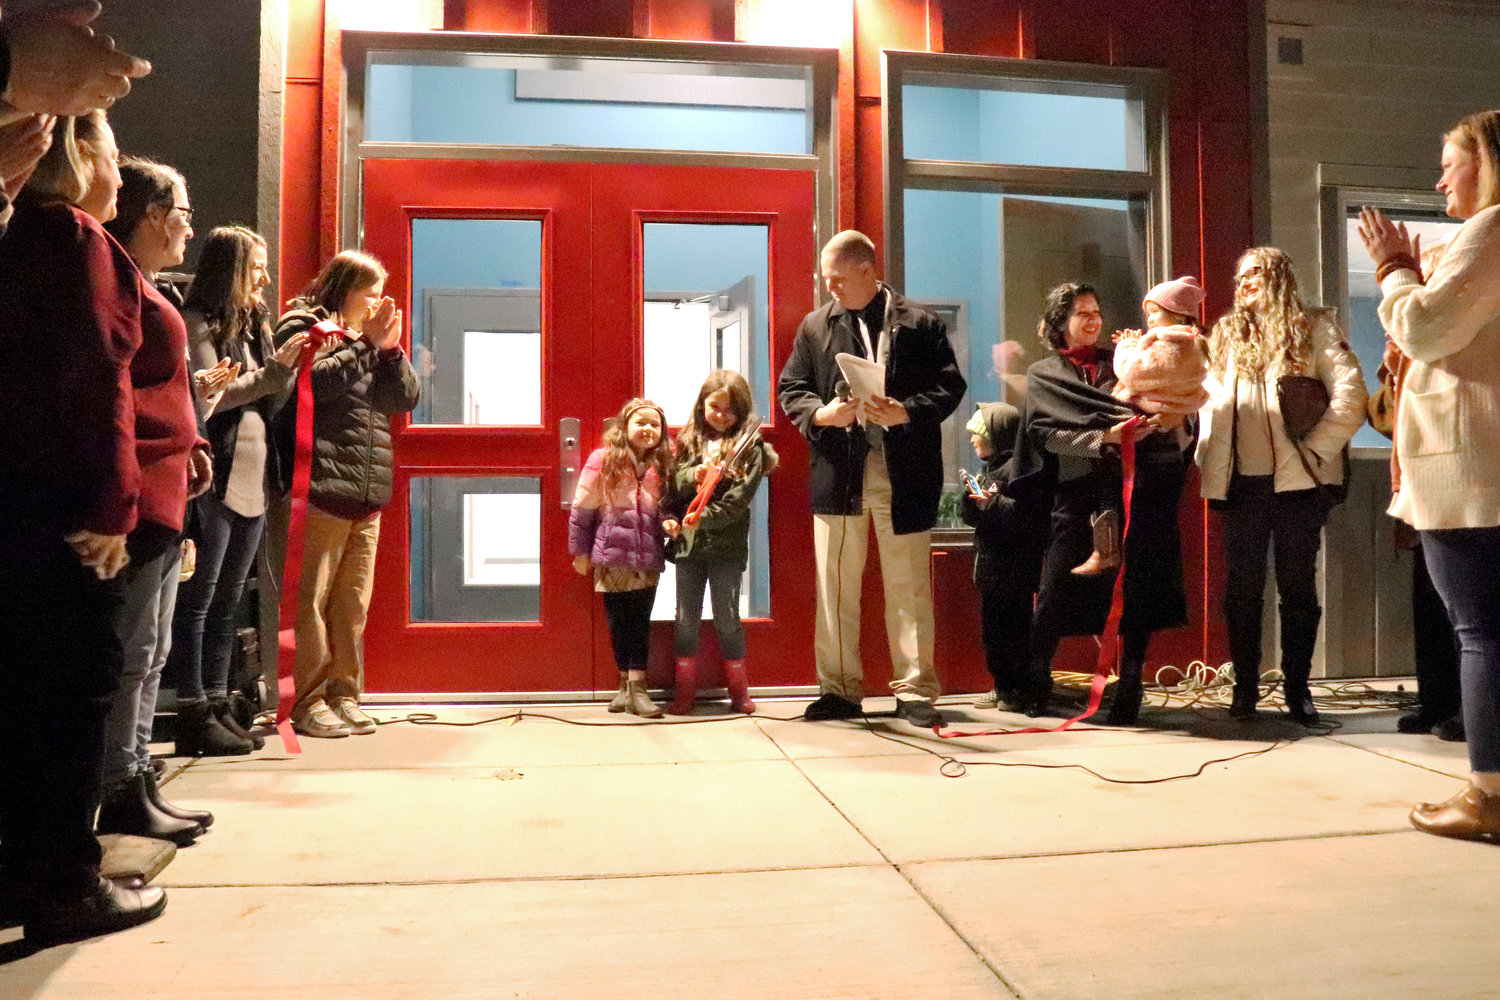 Oakville community members applaud after seven-year-olds Claire and Lexie cut the ribbon to the new Oakville Elementary School on Wednesday.